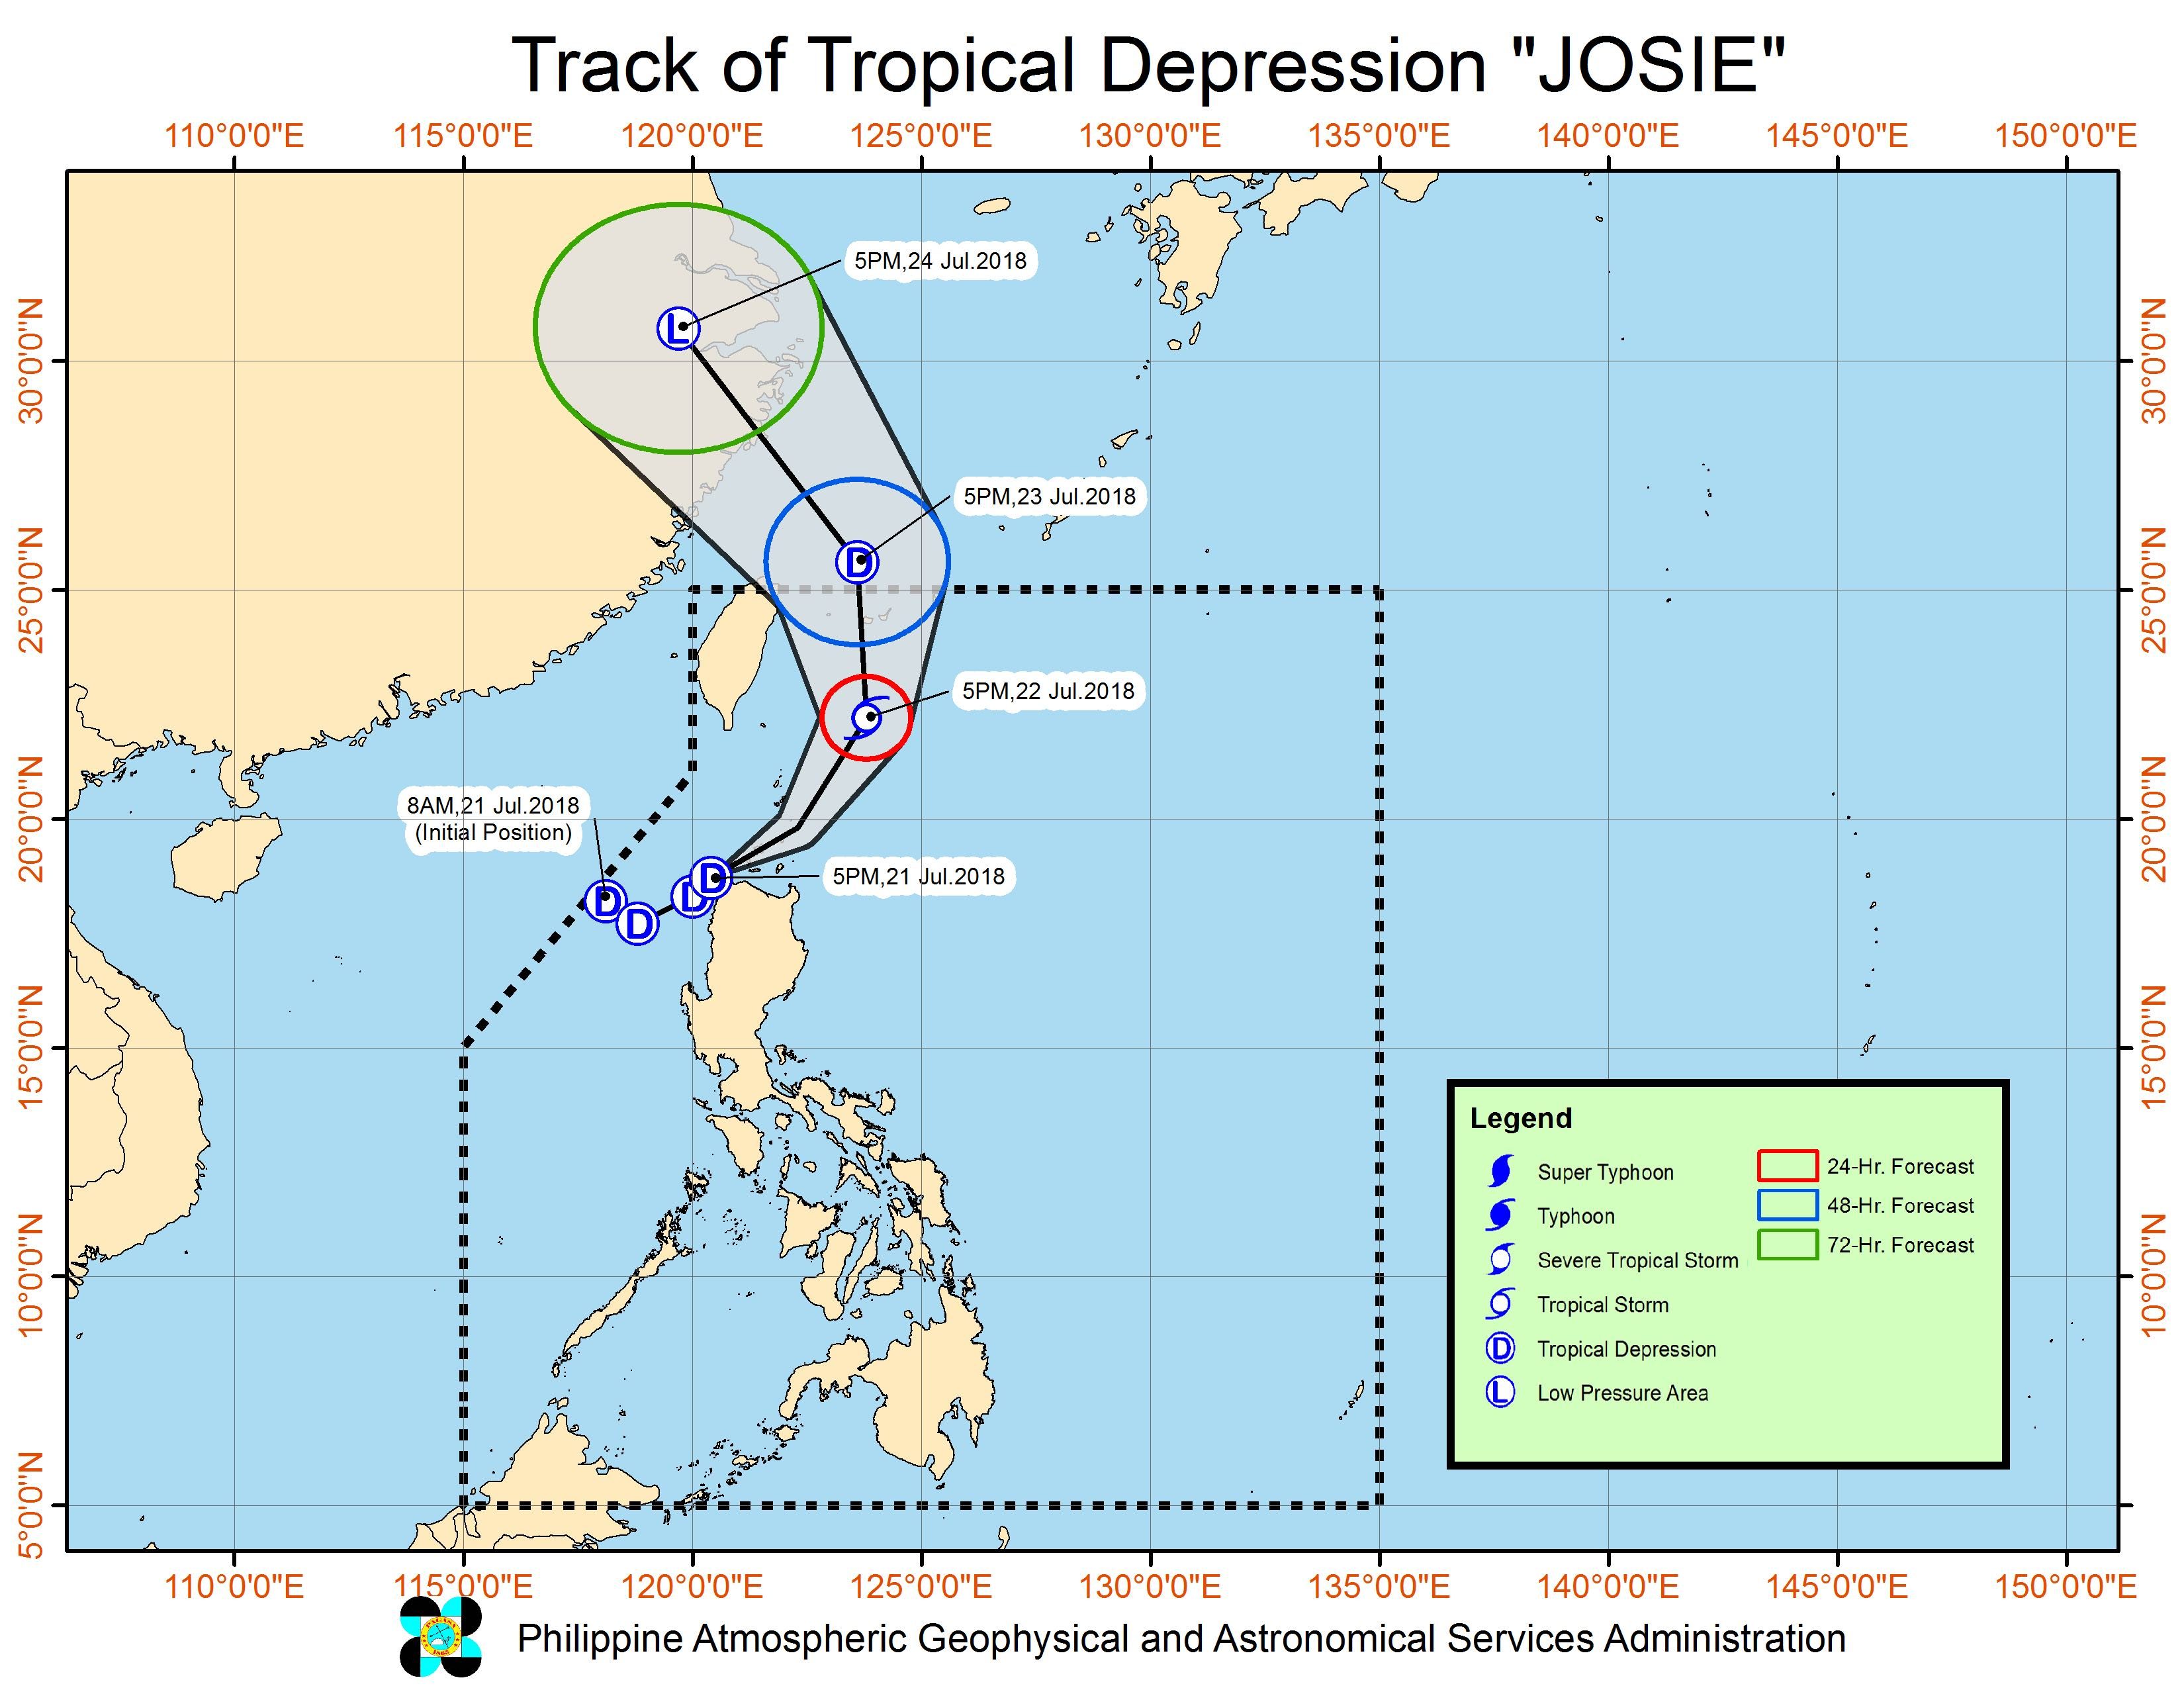 Forecast track of Tropical Depression Josie as of July 21, 2018, 8 pm. Image courtesy of PAGASA 